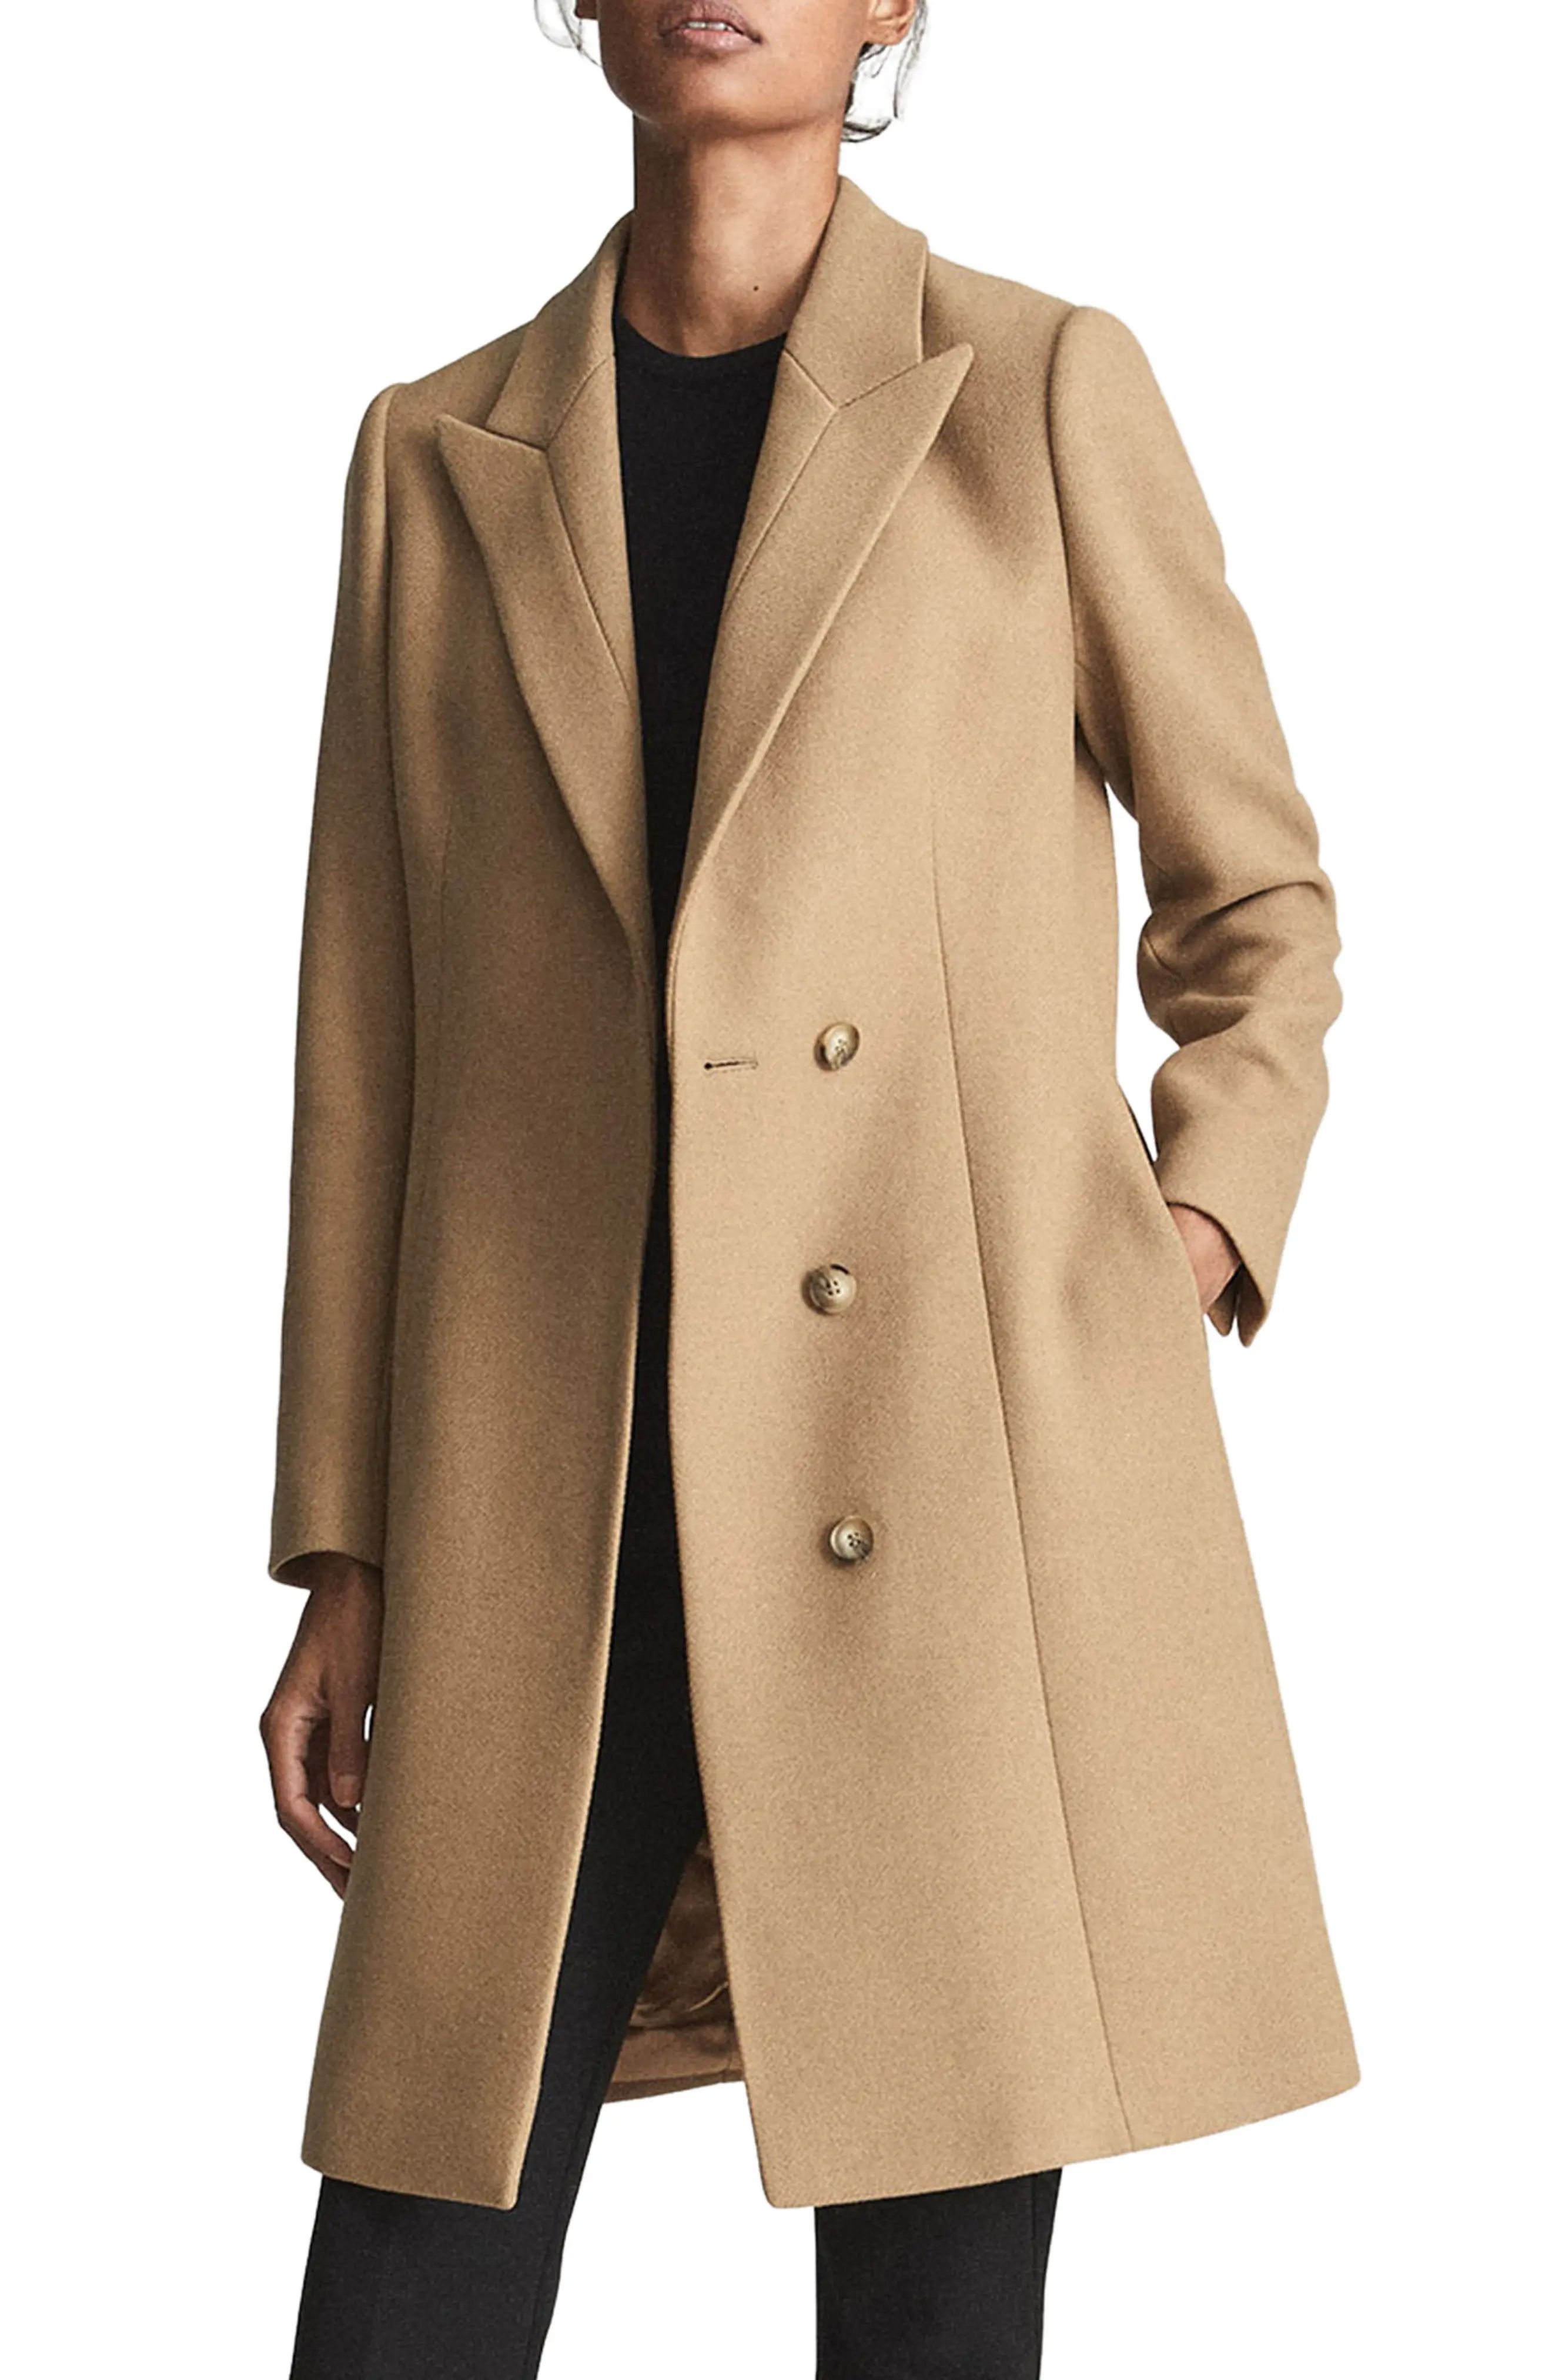 Reiss Marlow Wool Blend Coat, Size 2 Us in Camel at Nordstrom | Nordstrom